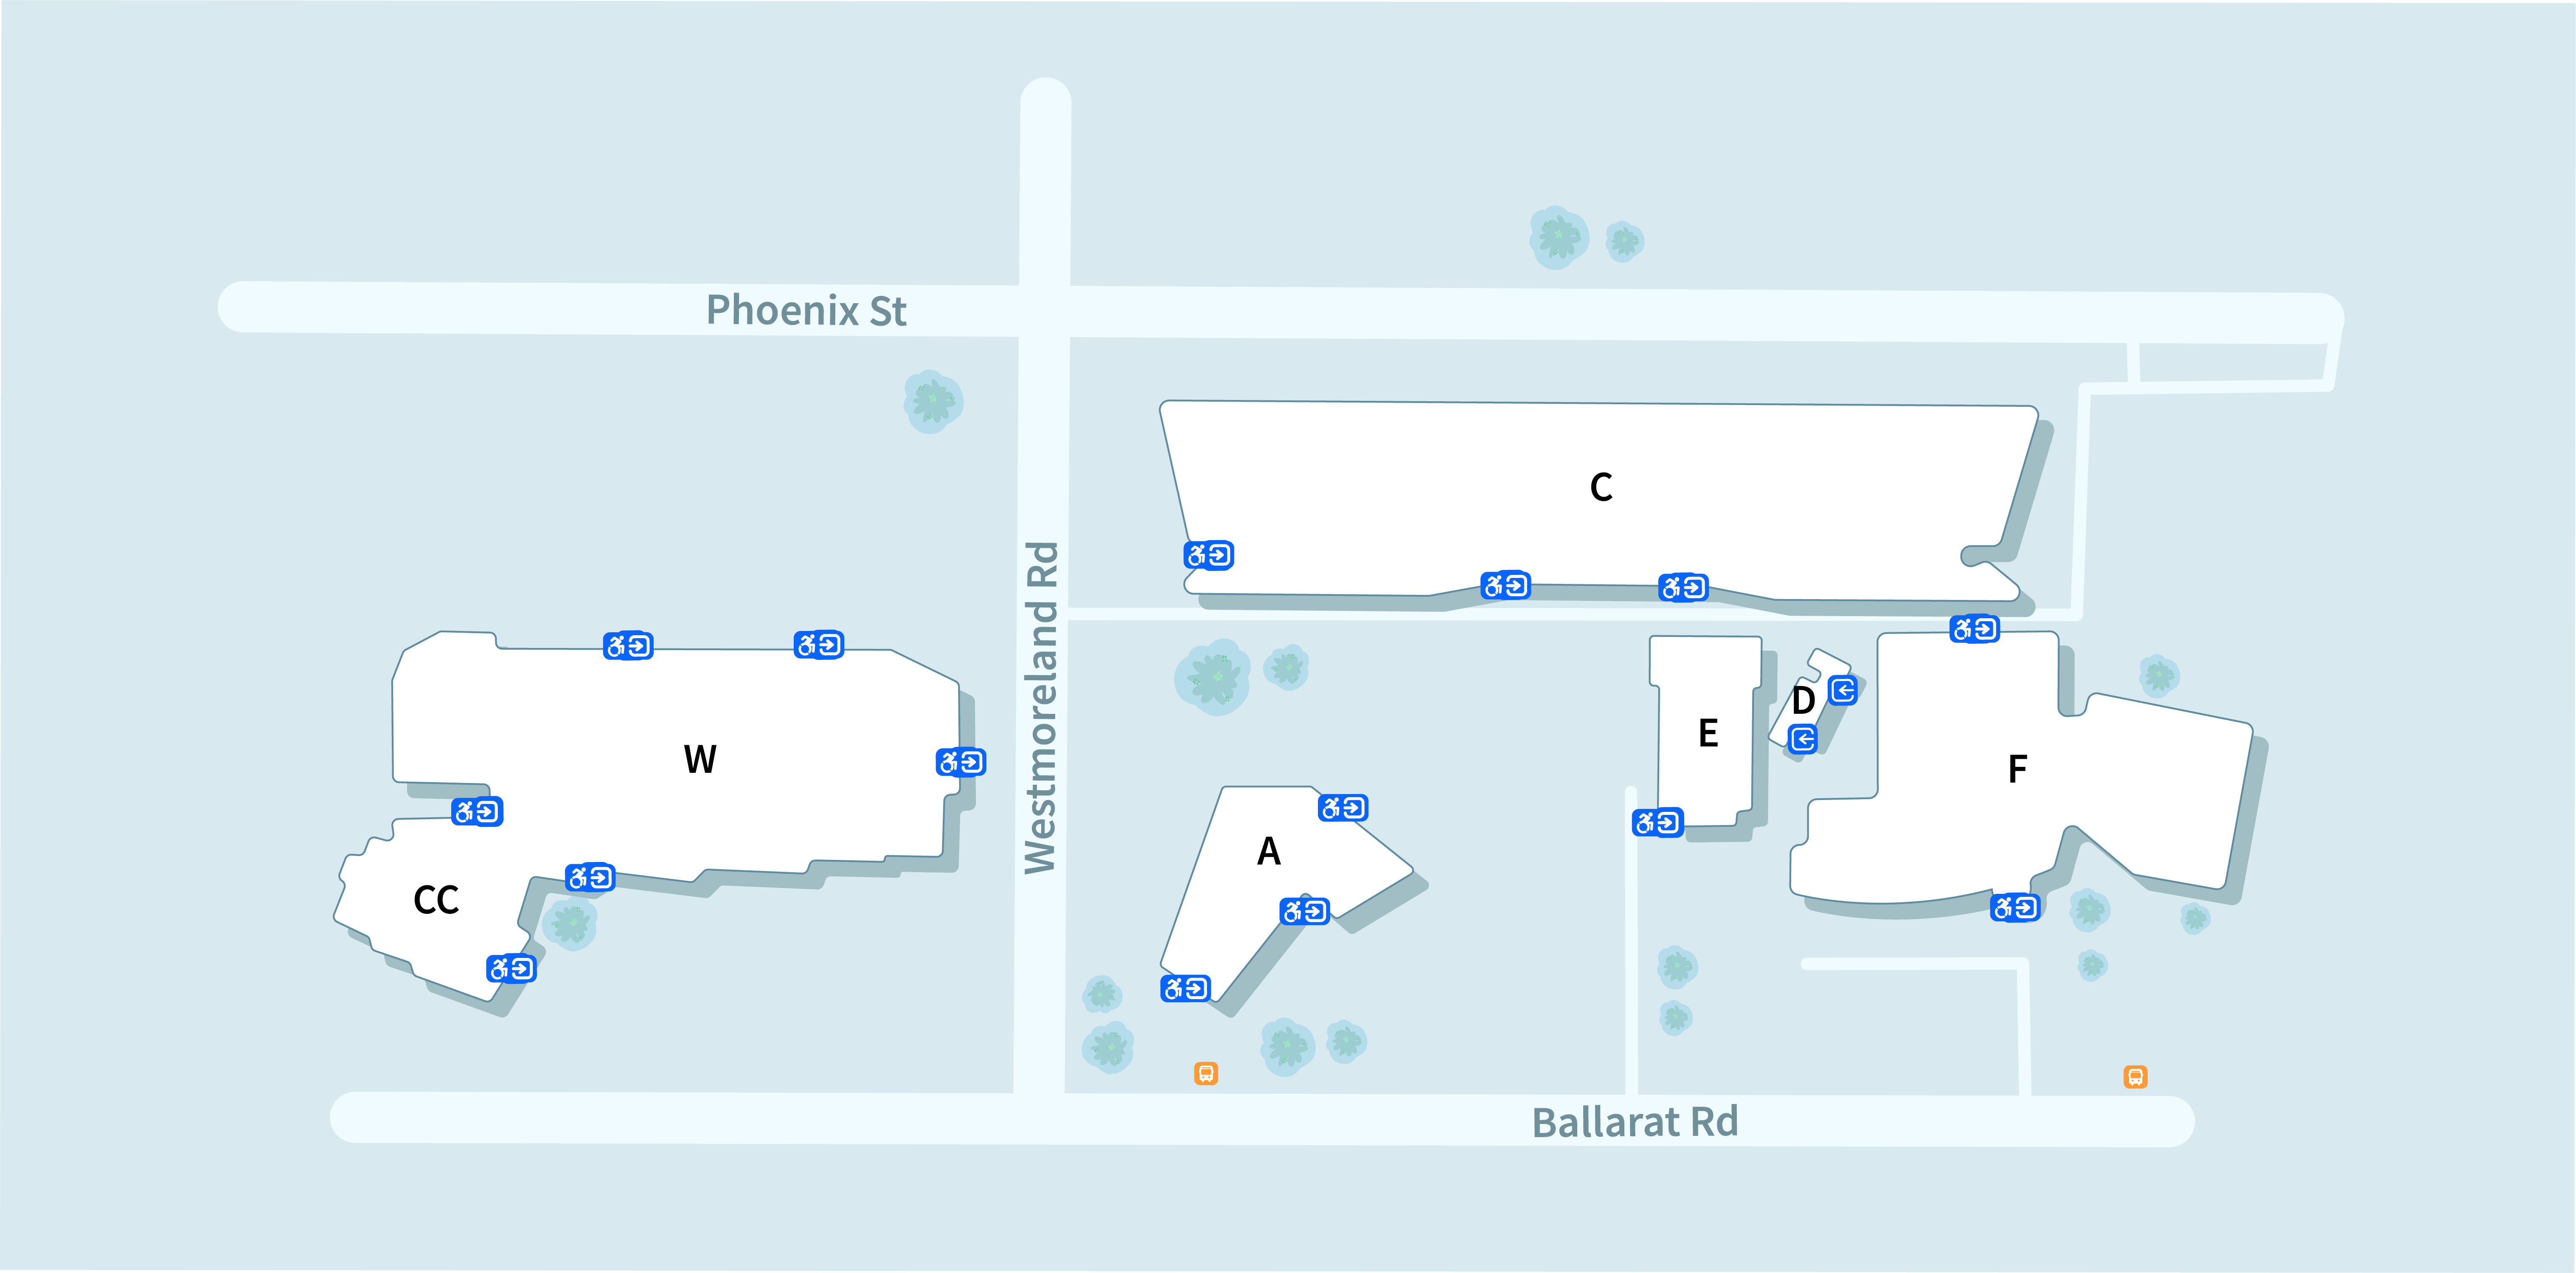  VU Sunshine Campus map showing the following buildings and their accessible entrances, from L-R: CC, W, A, C, E, D, F. Westmoreland Rd separates Buildings CC and W from the others.